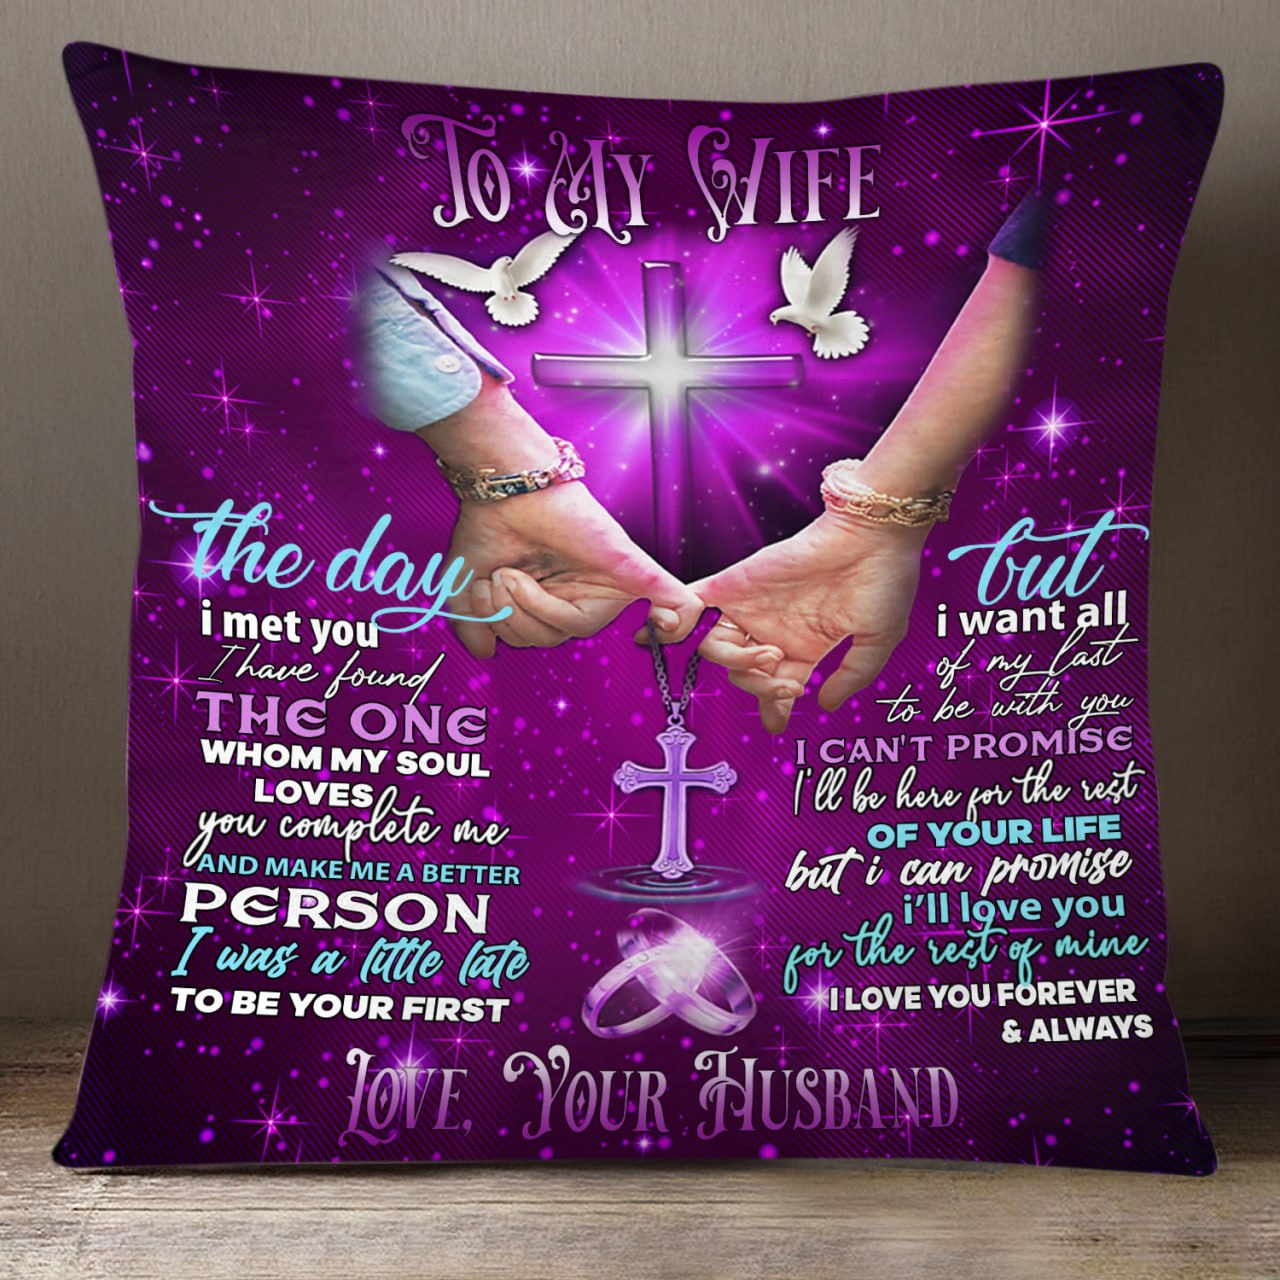 I Love You Forever And Always - Personalized Pillow - Gift For Wife